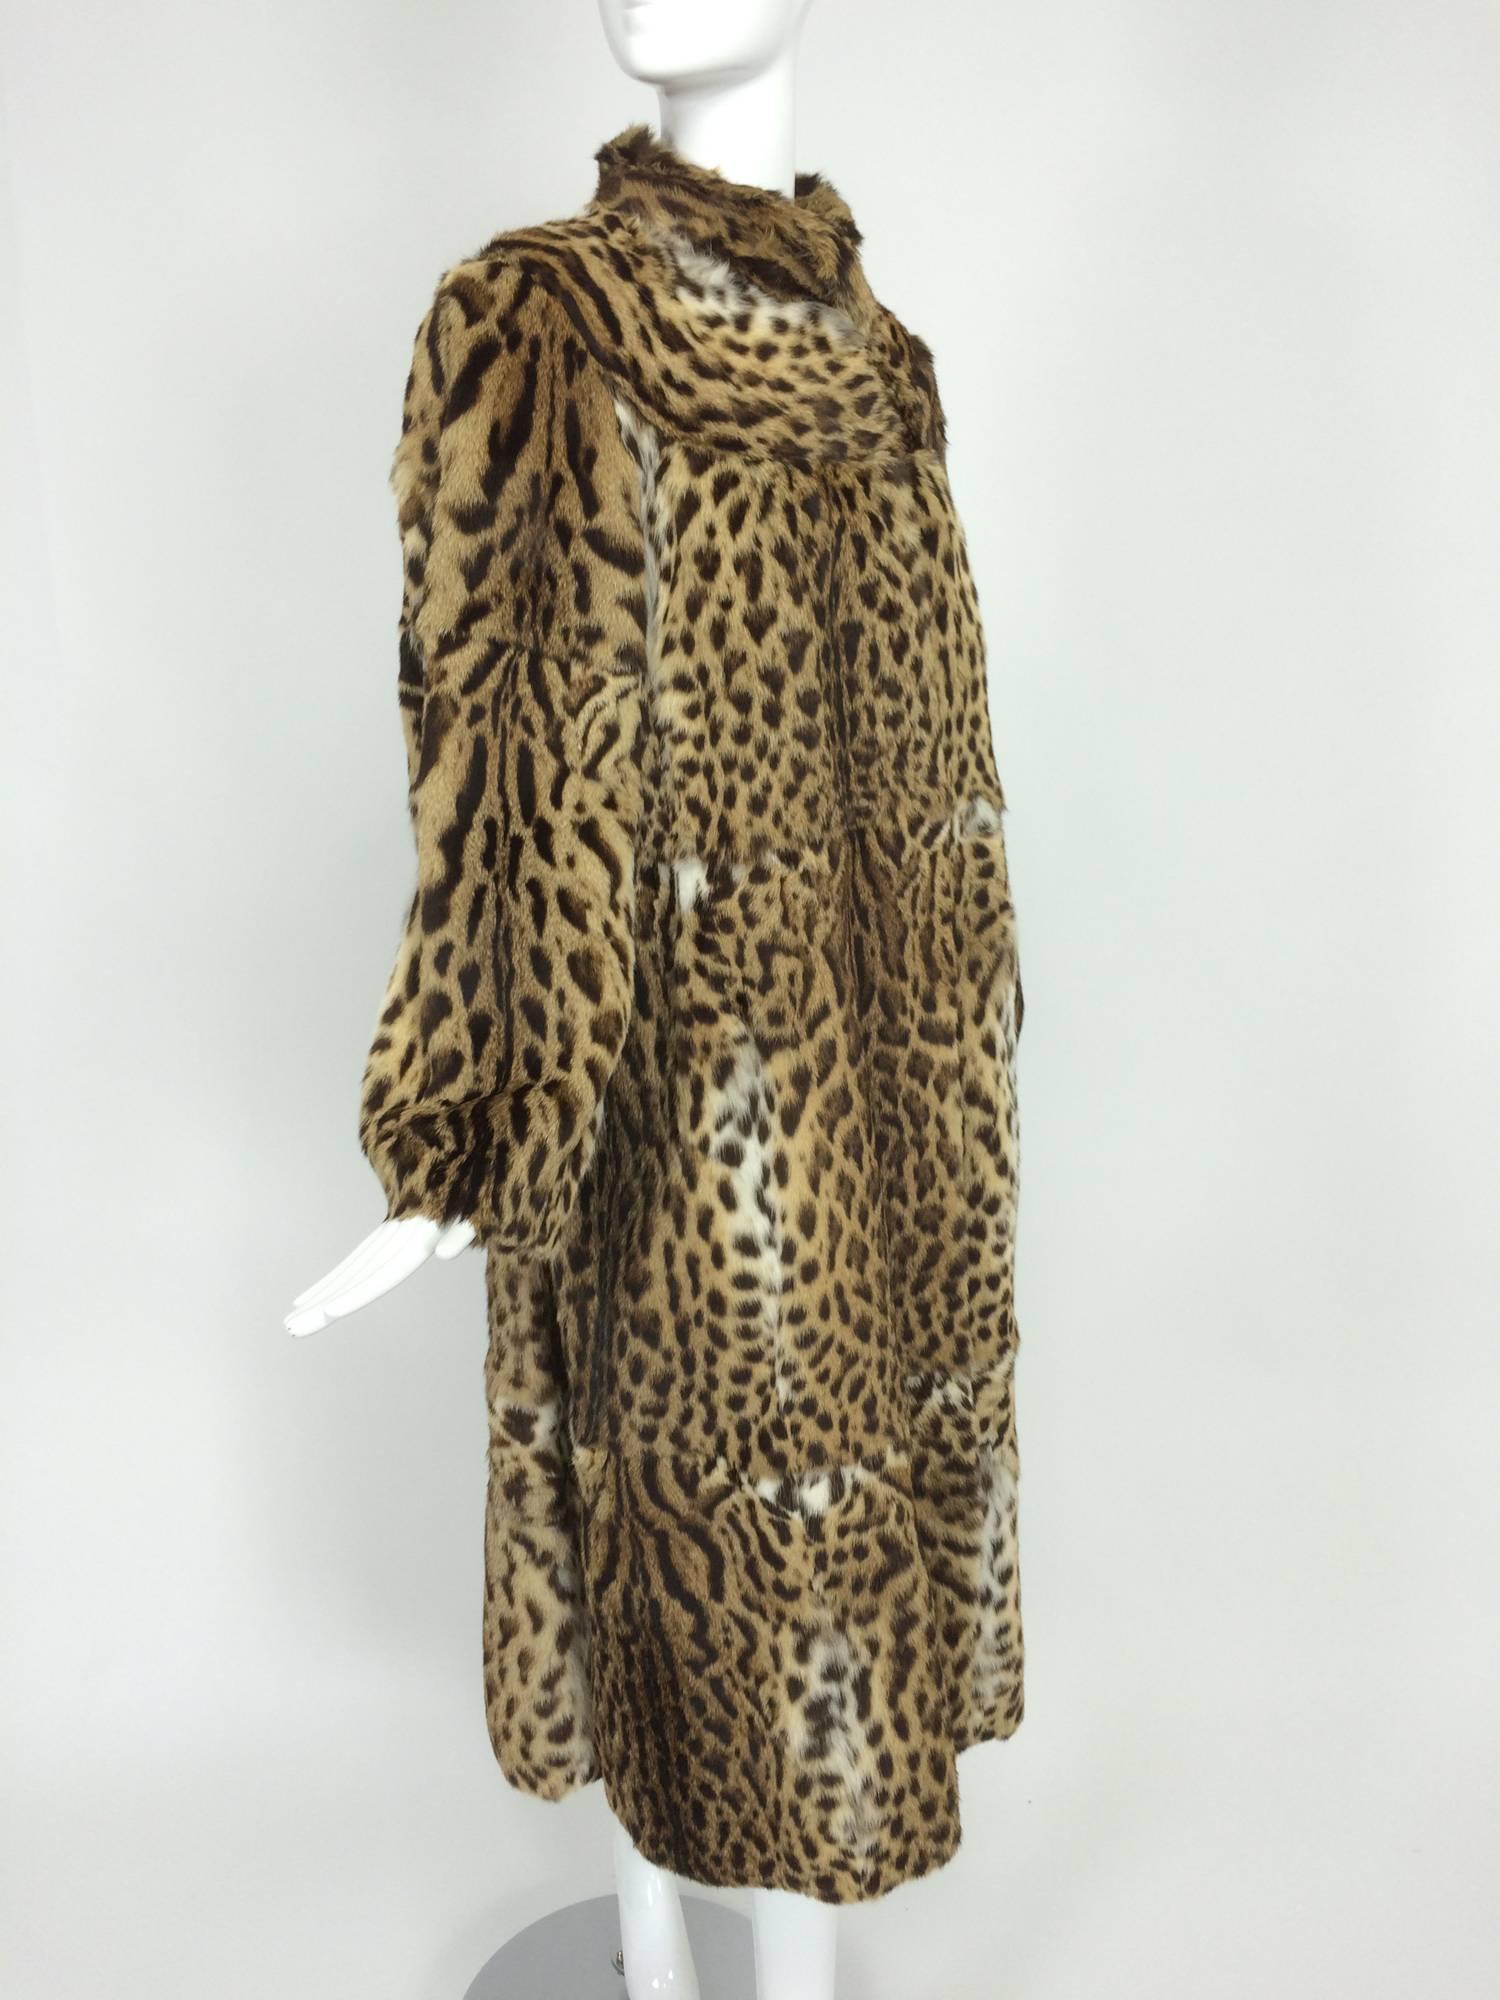 Full length spotted fur coat labeled Yorn Boutique, Germany. Beautiful soft fur coat with yoke shoulder, stand up collar and long semi full sleeves that taper at the wrist. The coat closes at the front with fur hooks, it is fully lined and in